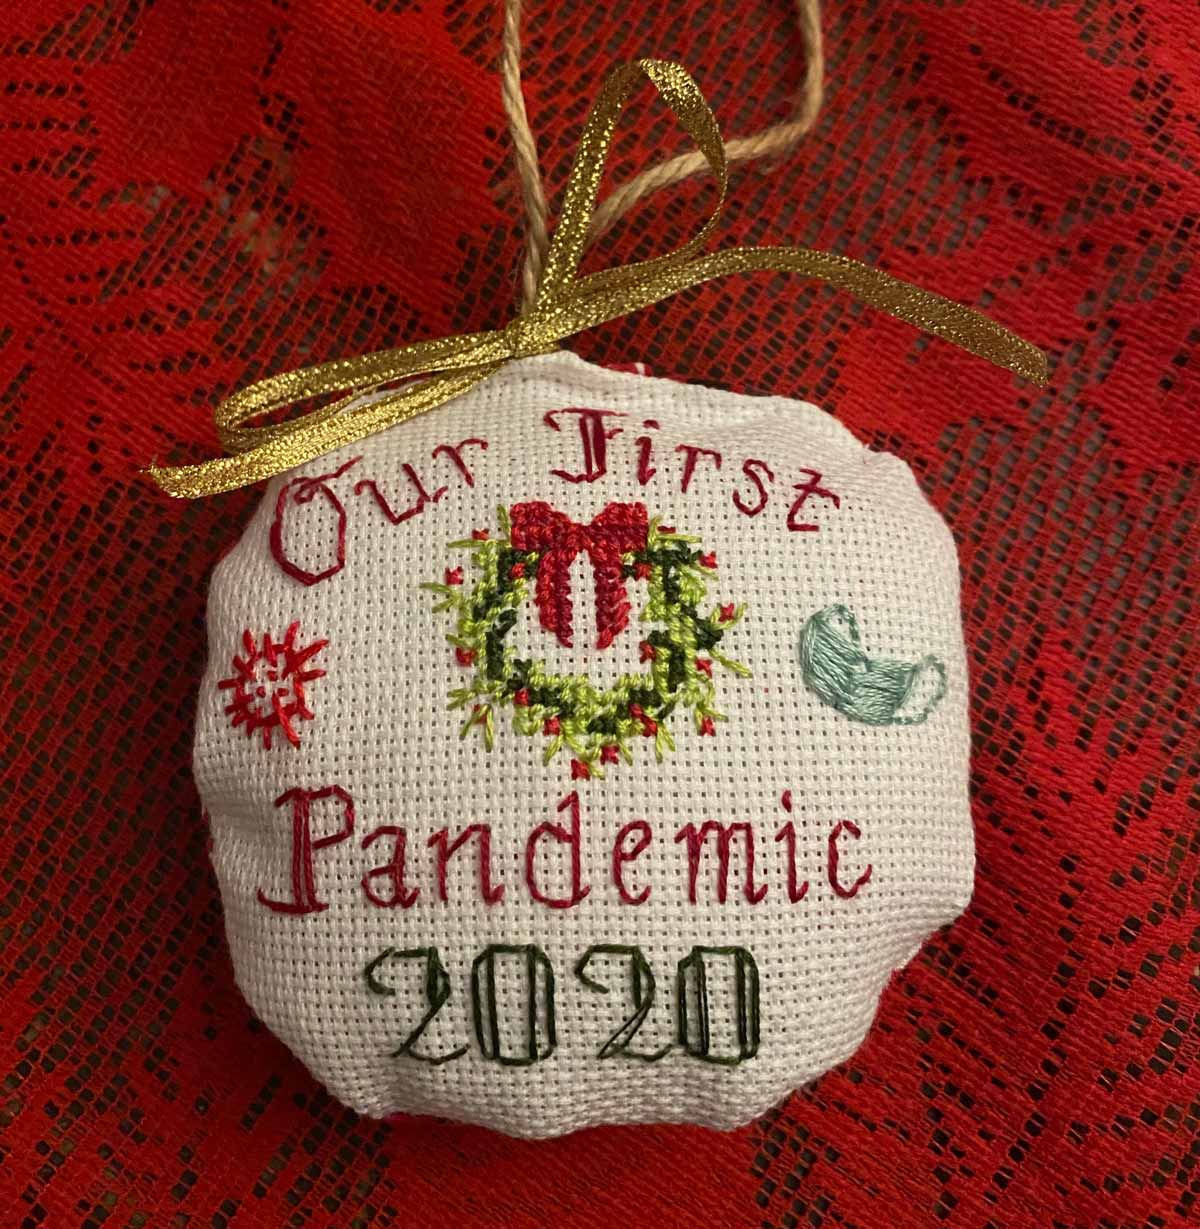 Made a commemorative ornament for my husband. We’ve survived 9 months of lockdown in a one bedroom apartment!